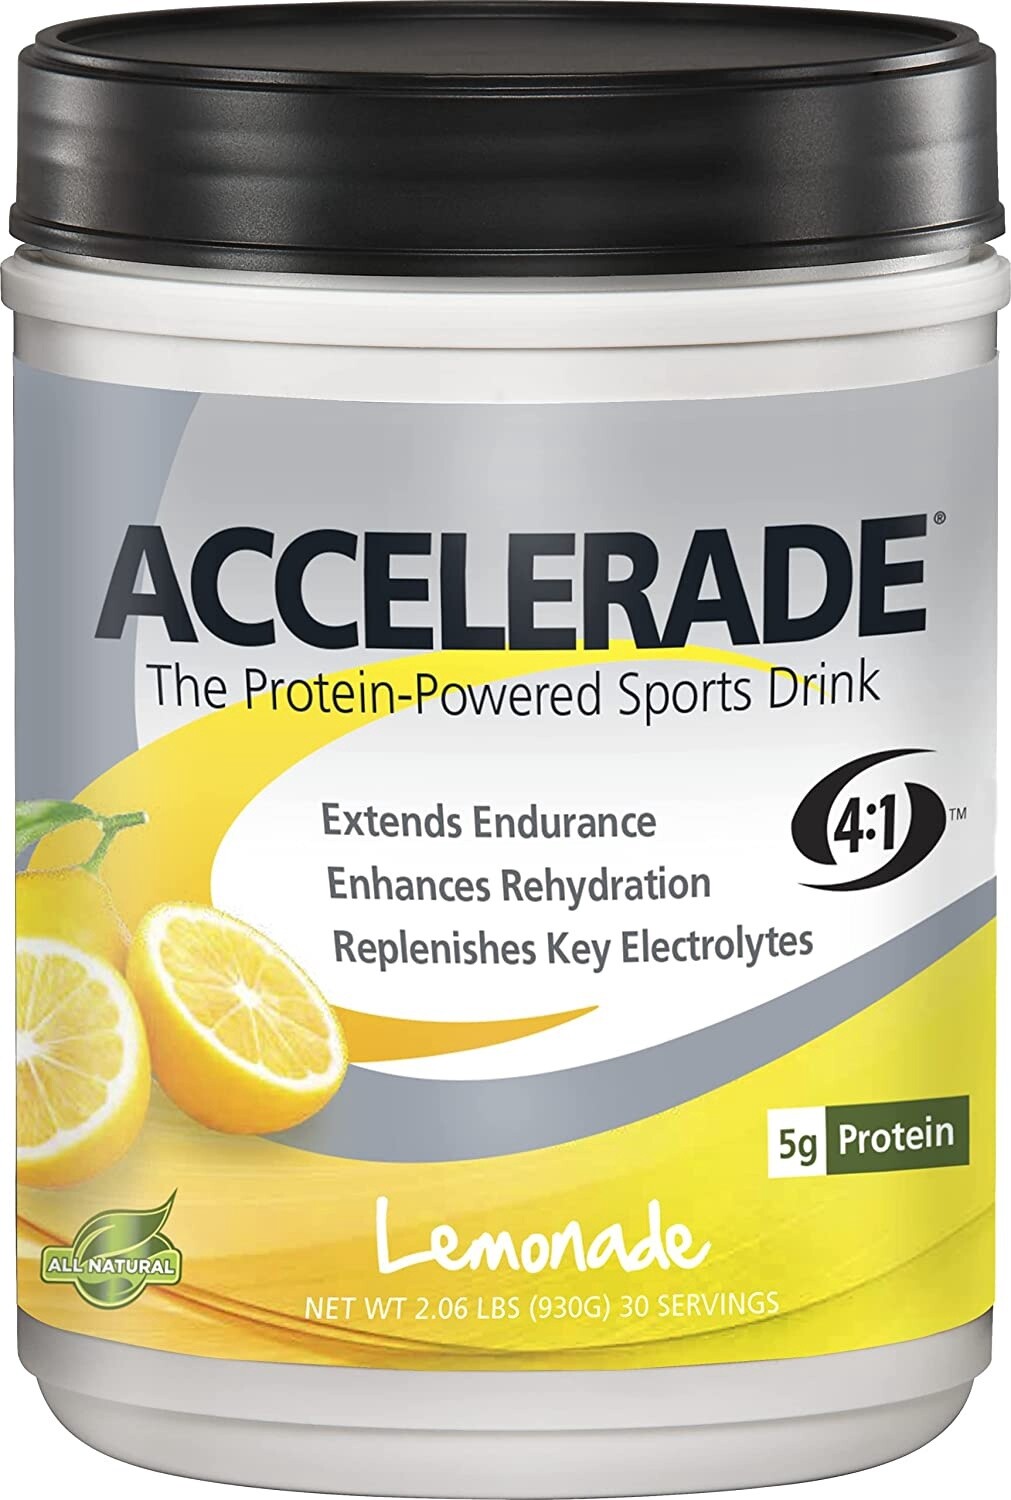 Accelerade, All Natural Sport Hydration Drink Mix with Protein, Carbs, and Electrolytes for Superior Energy Replenishment - Net Wt. 2.06 lb, 30 Serving (Lemonade)